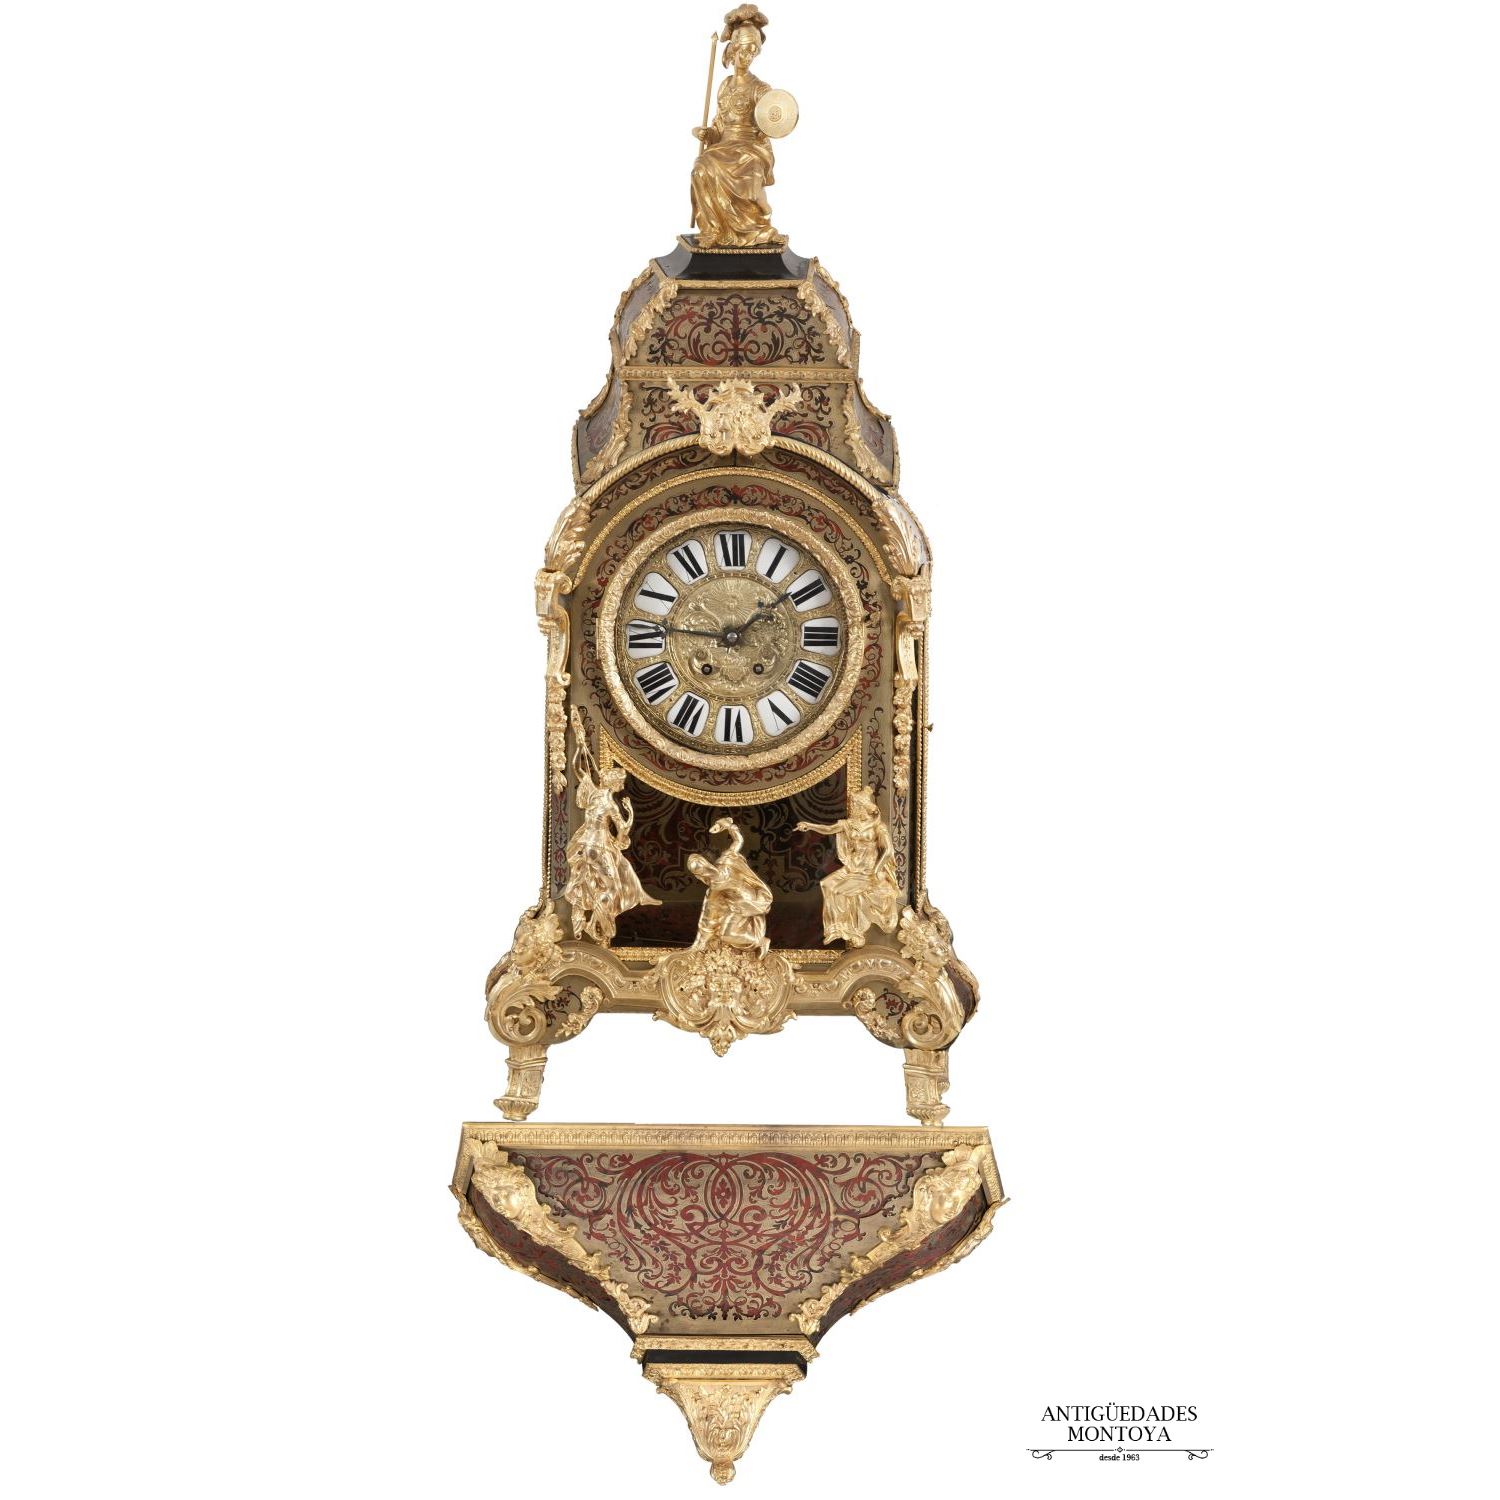 Boulle watch, Louis XIV style. France, c. 1880